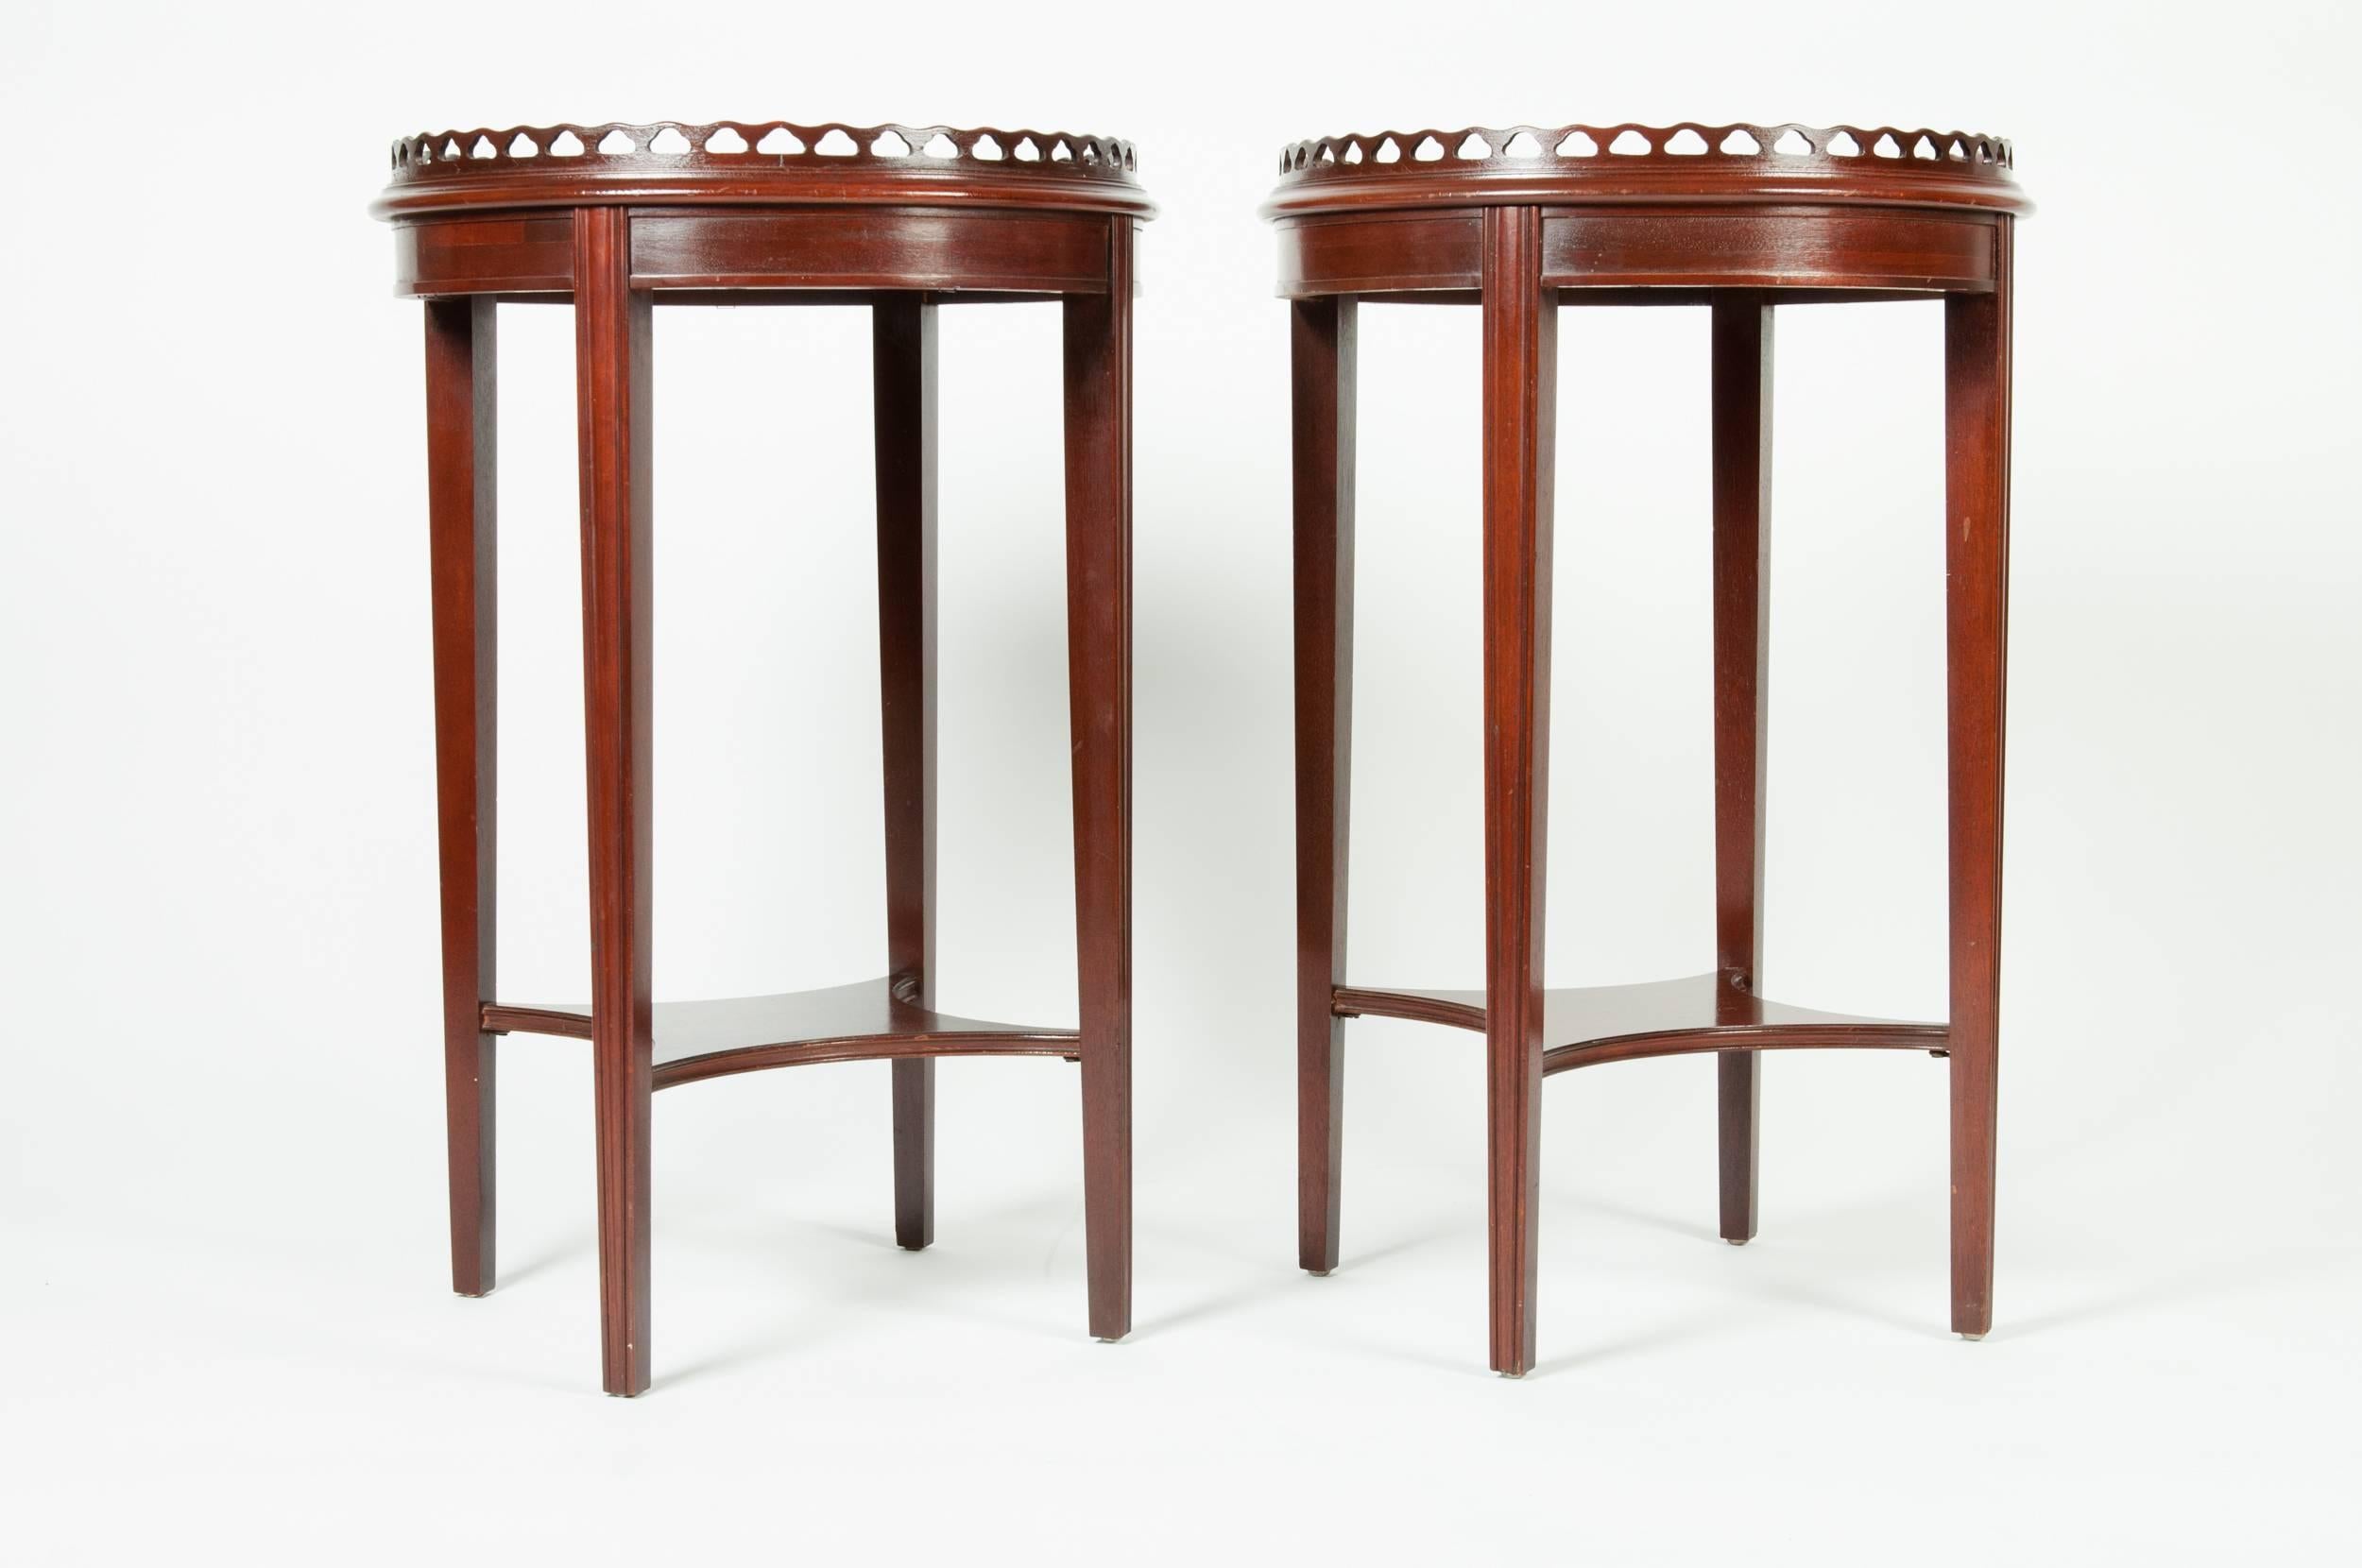 Antique pair of mahogany wood side/end tables with top round gallery tray. The tables measure 27 inches high x 17 inches in diameter.